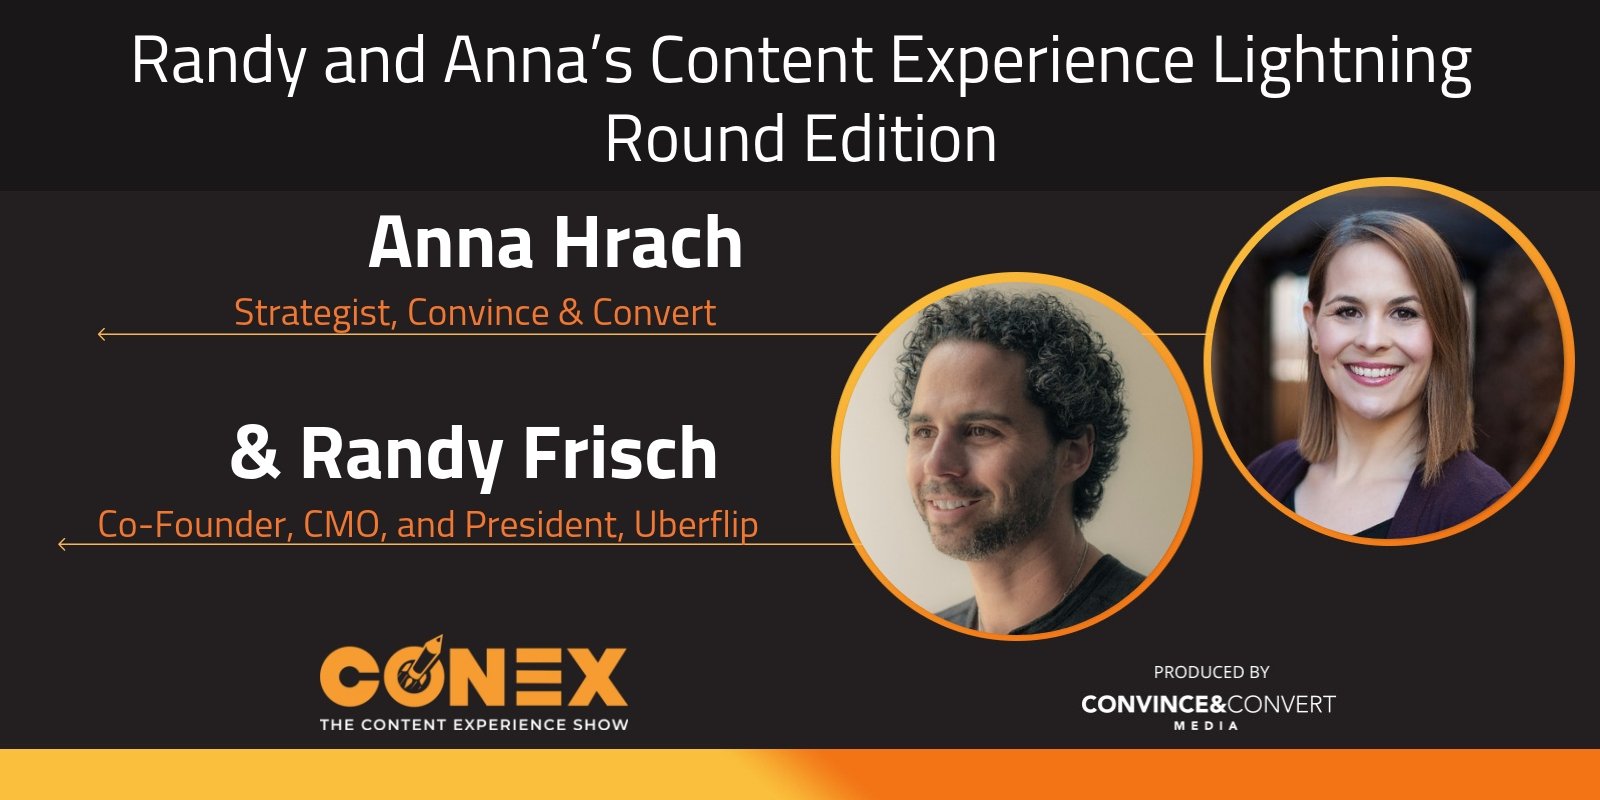 Randy and Anna’s Content Experience Lightning Round Edition